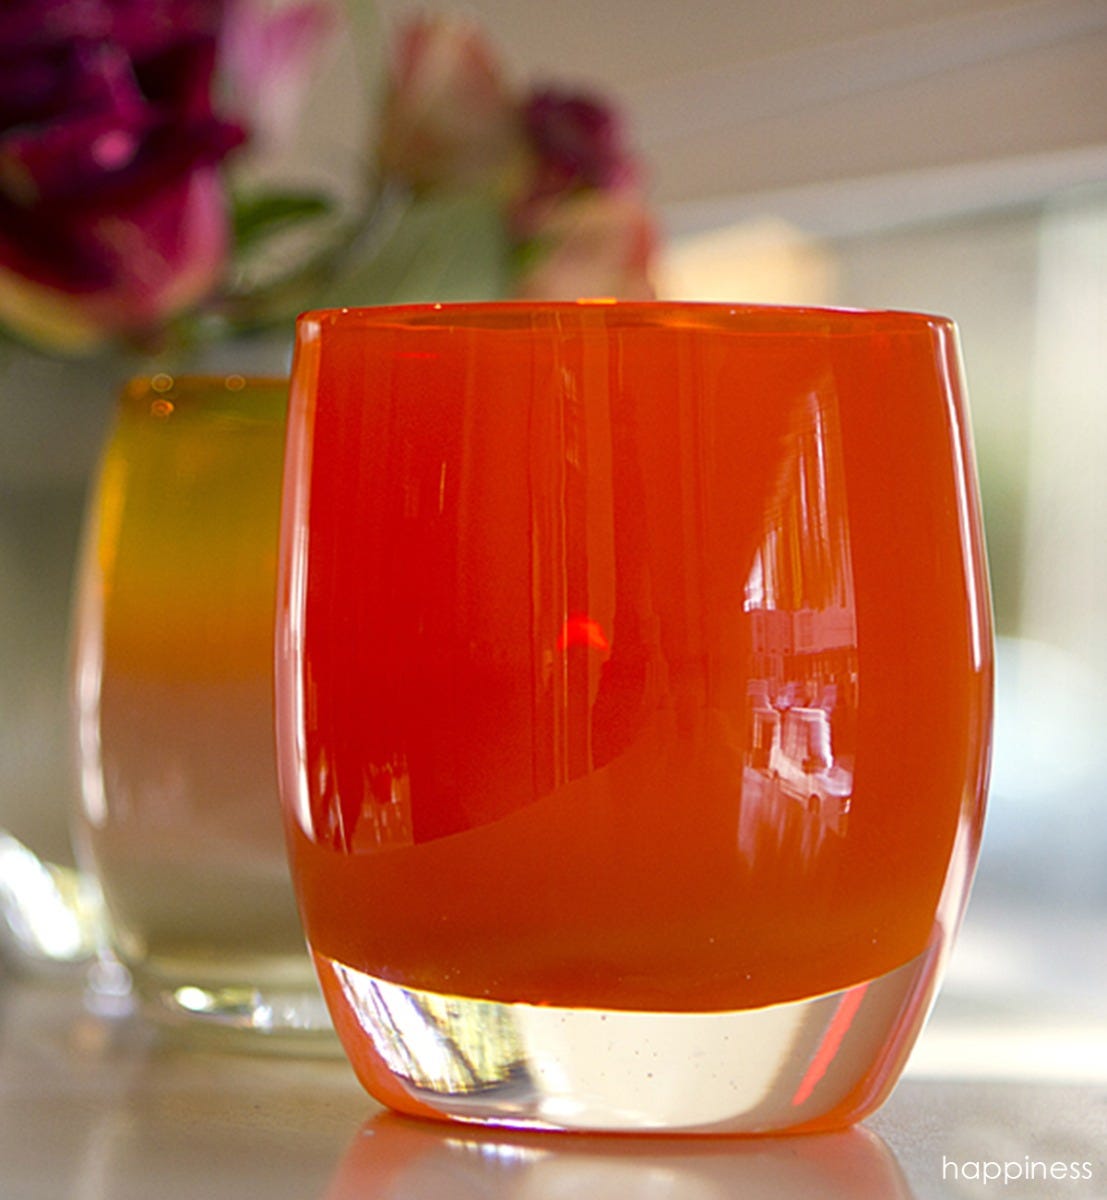 happiness scarlet red hand-blown glass votive candle holder.